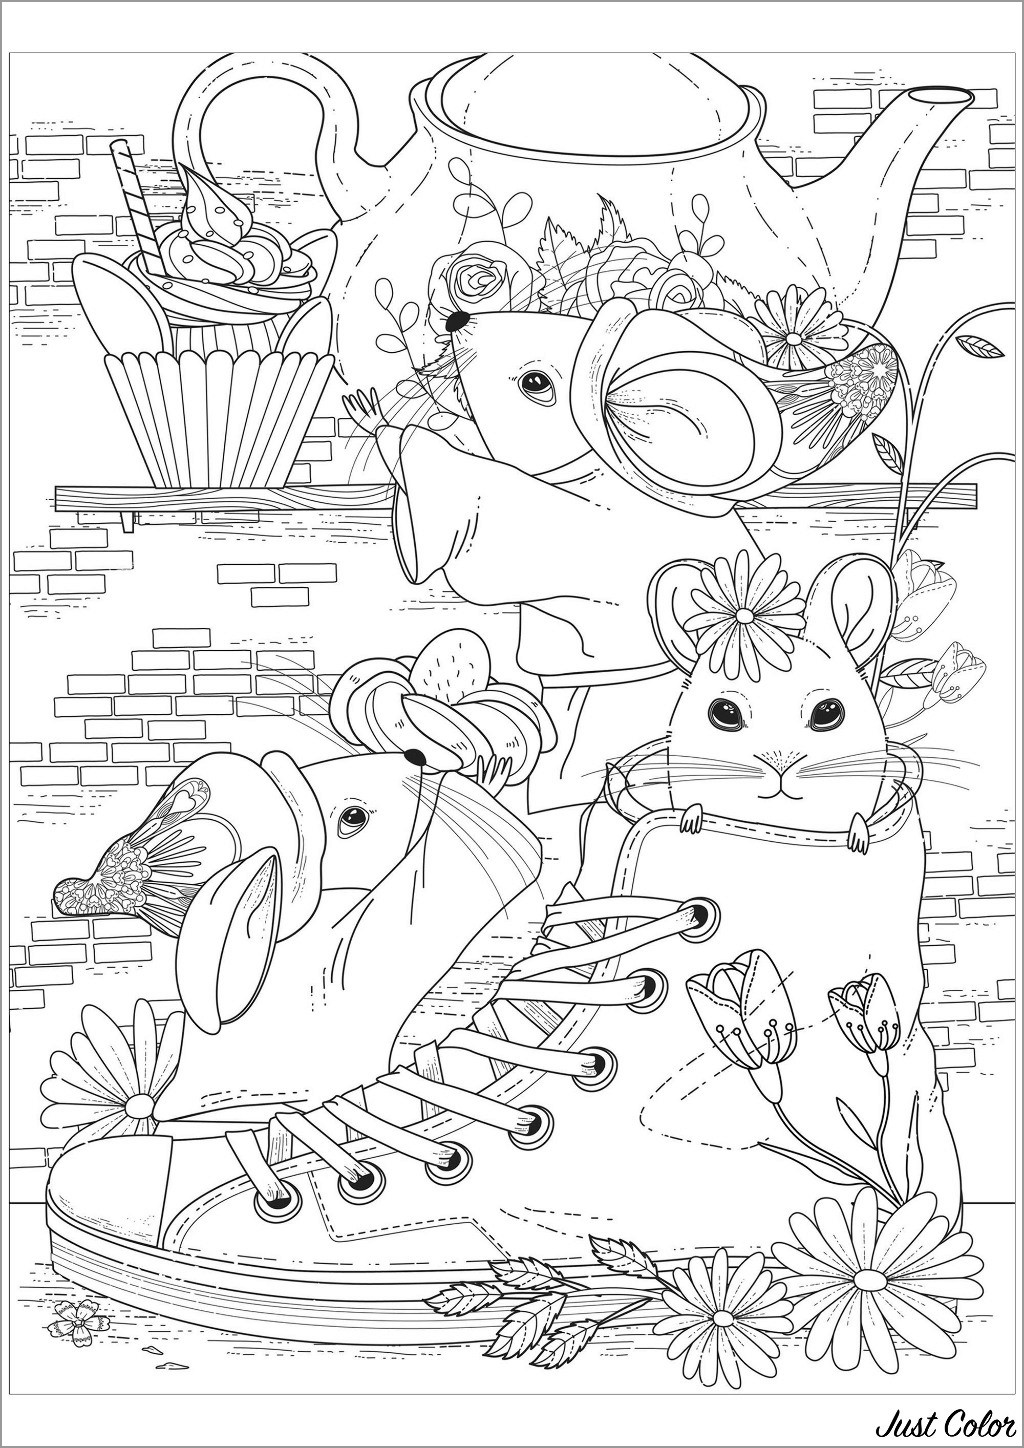 Cute Mouse Coloring Page to Print